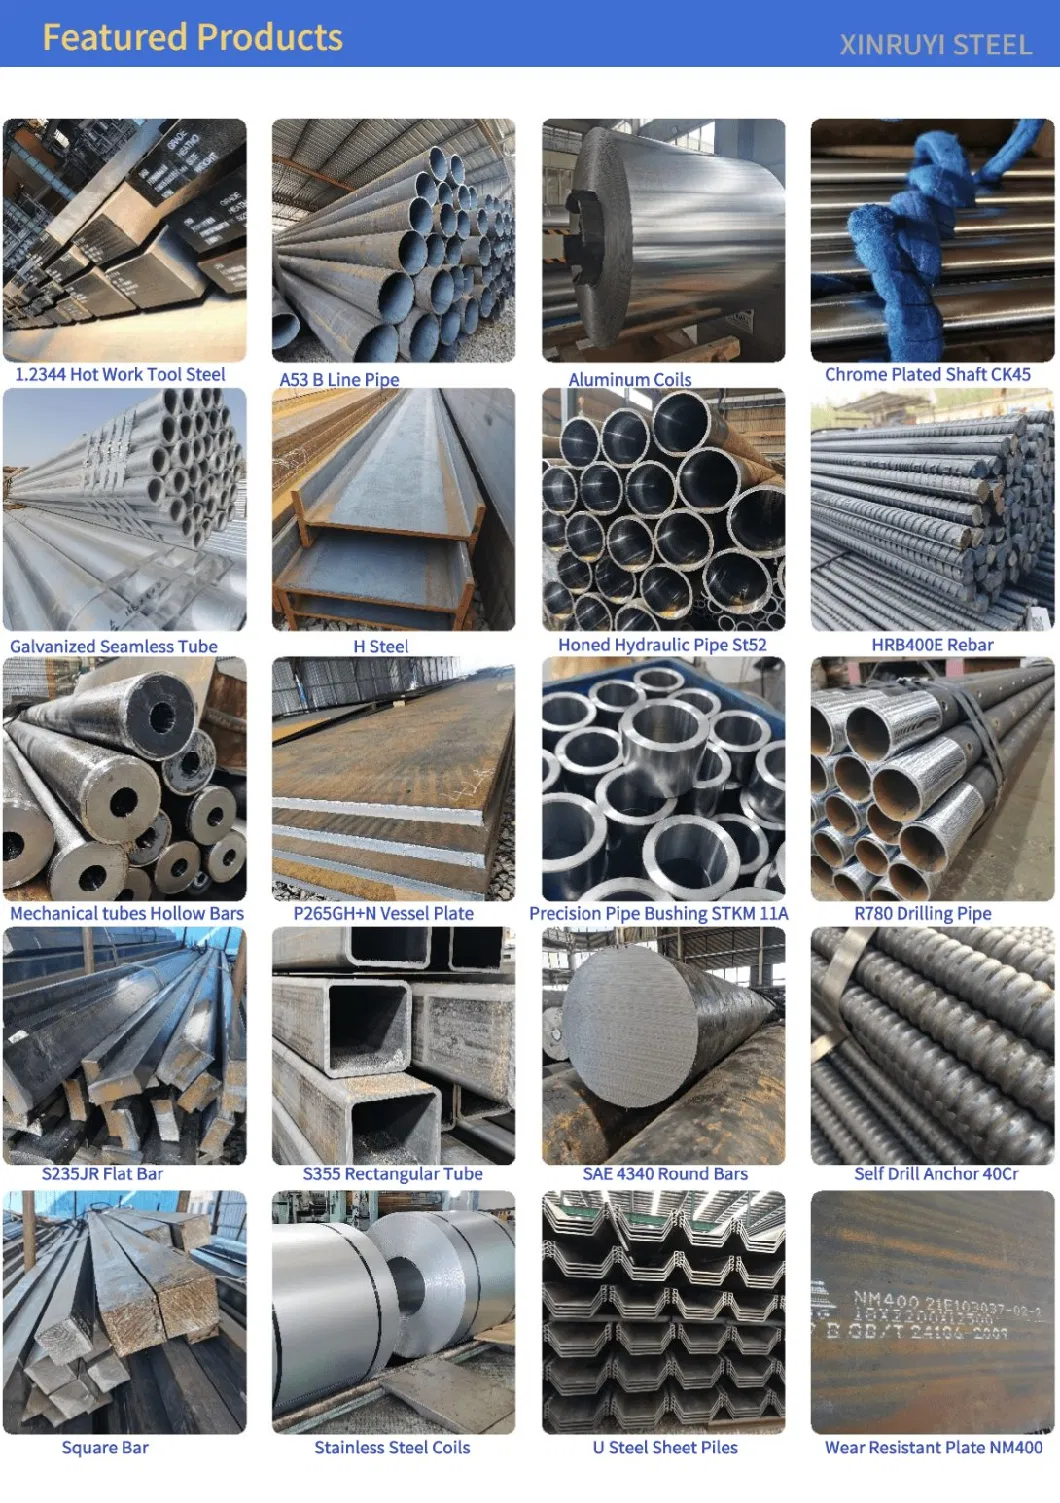 ASTM a 519 AISI 4130 Hydraulic Cylinder Seamless Steel Pipe